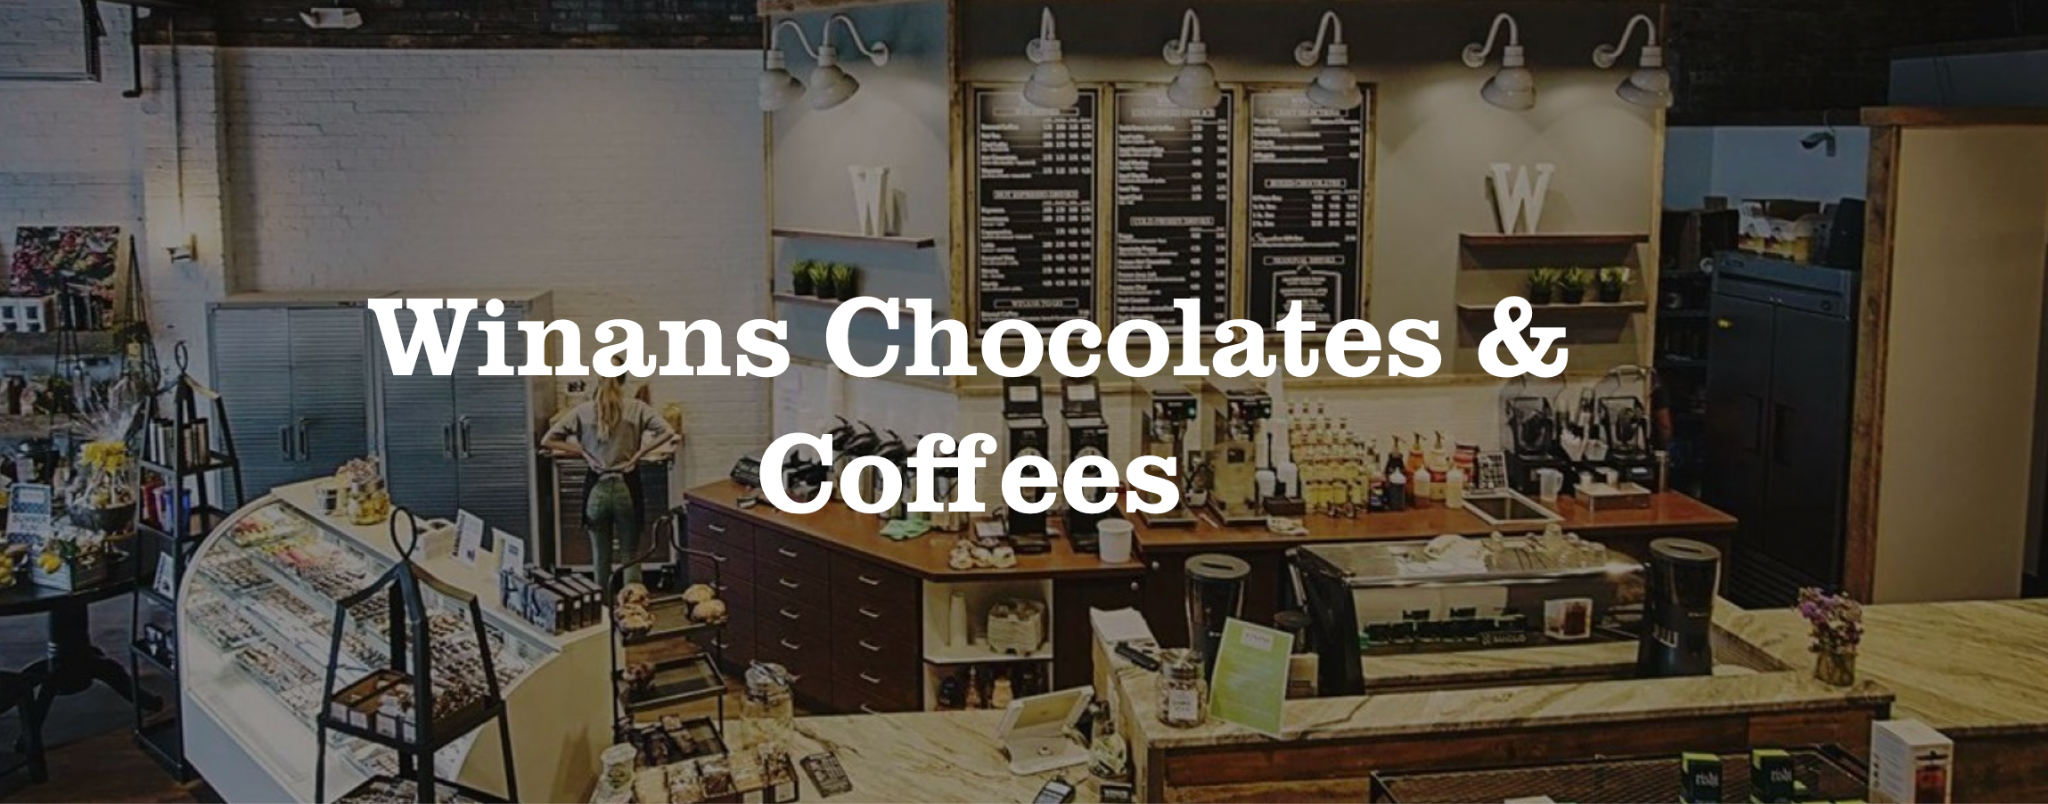 Why the owner of winans chocolates & coffees loves her location in downtown springfield Article Photo